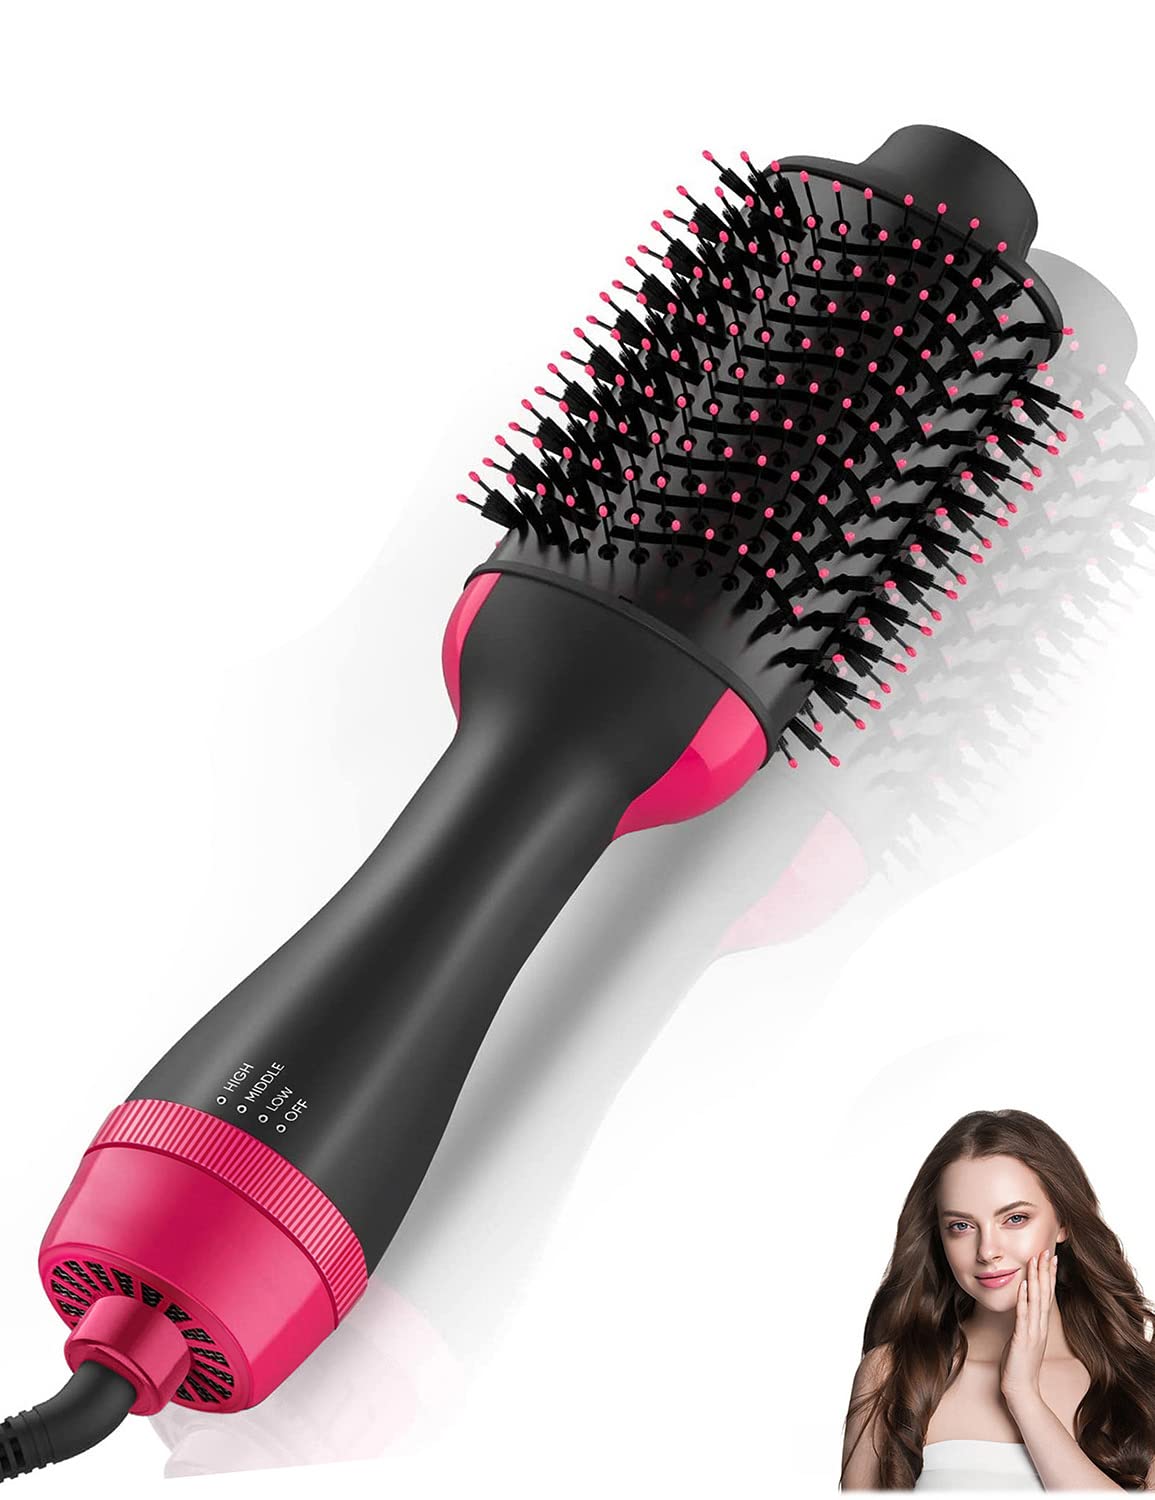 I recently purchased the Nurifi hair dryer brush, and I can confidently say that it has revolutionized my hair styling game. It works well for straightening, drying, curling and volumizing my hair. With the powerful airflow, it dries my hair quickly! The big brush makes it easy to achieve different looks with no need of styling tools and gives a salon like look. It also comes with multiple heat settings which I feel suit different hair types. The brush design is quite sturdy and ensures a good g